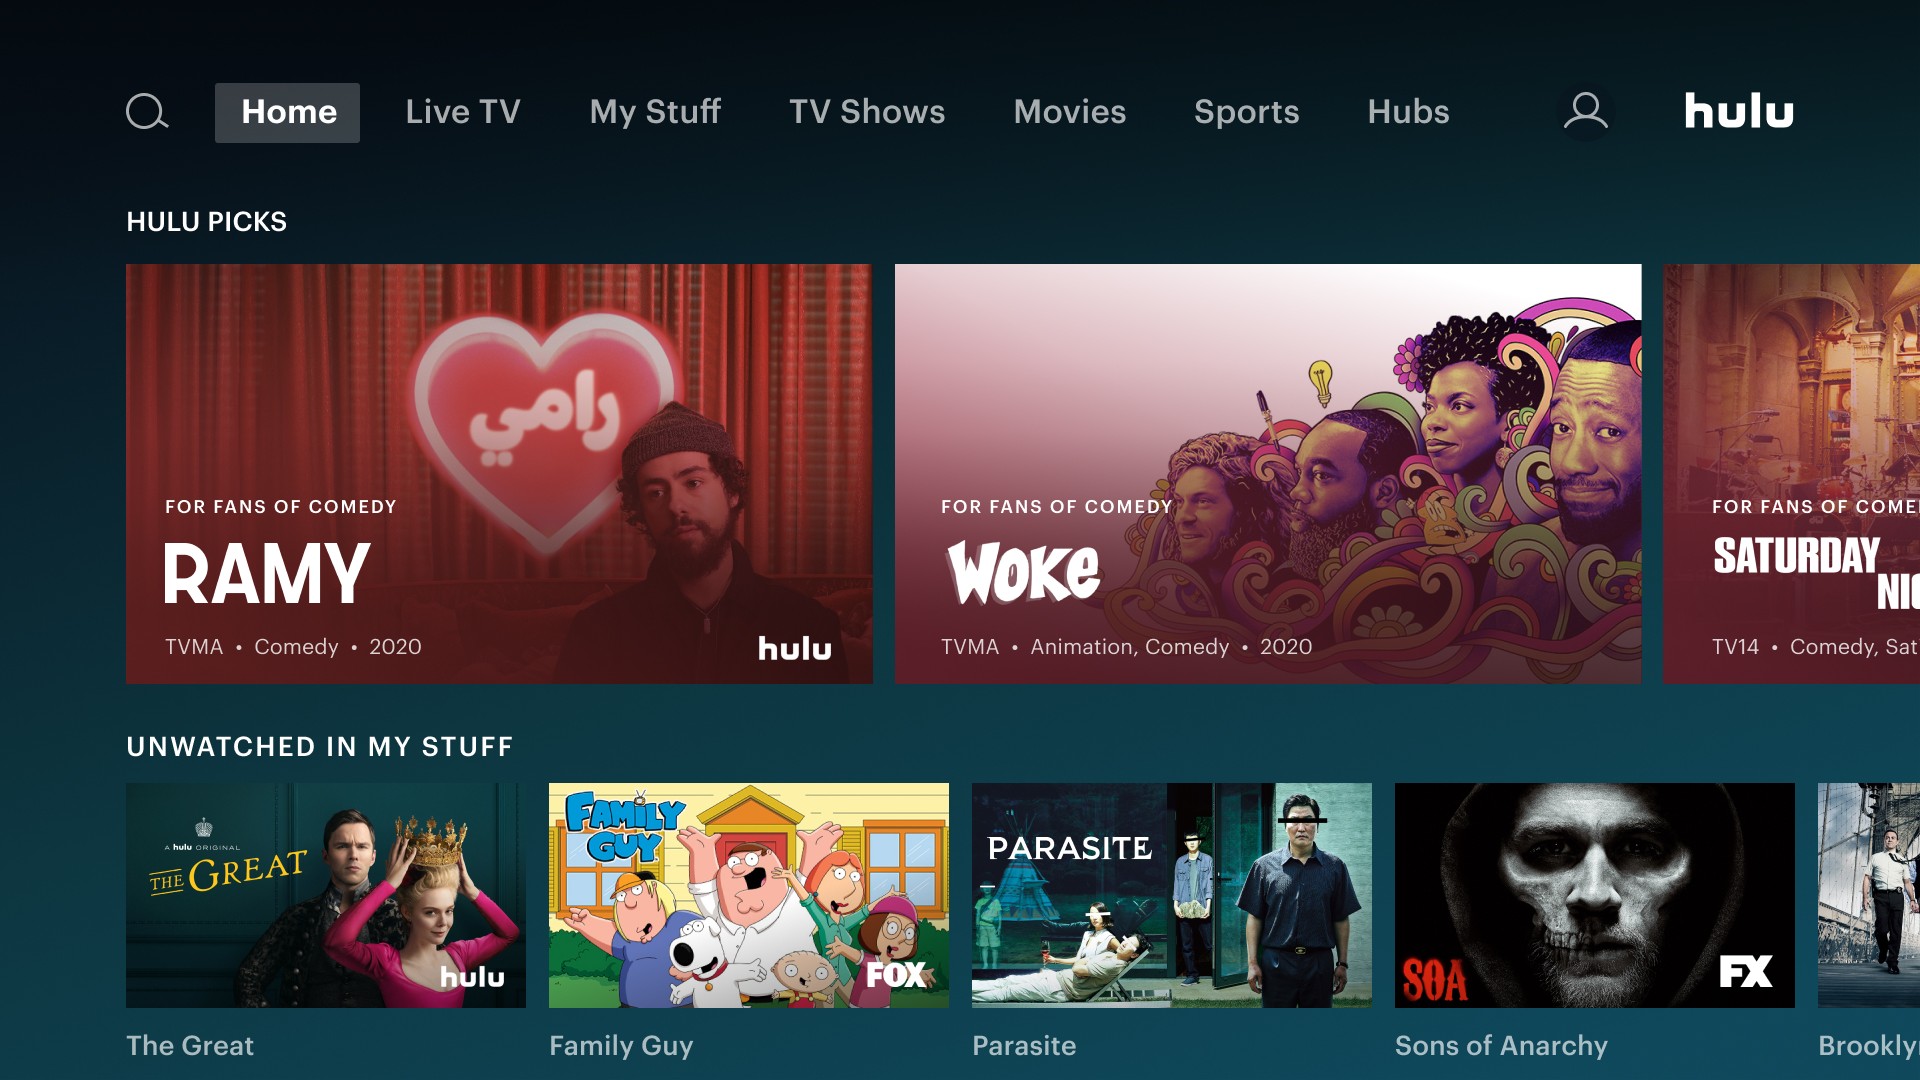 How to watch TV shows online for free (Legally) - Does Hulu Live Have A 30 Day Free Trial